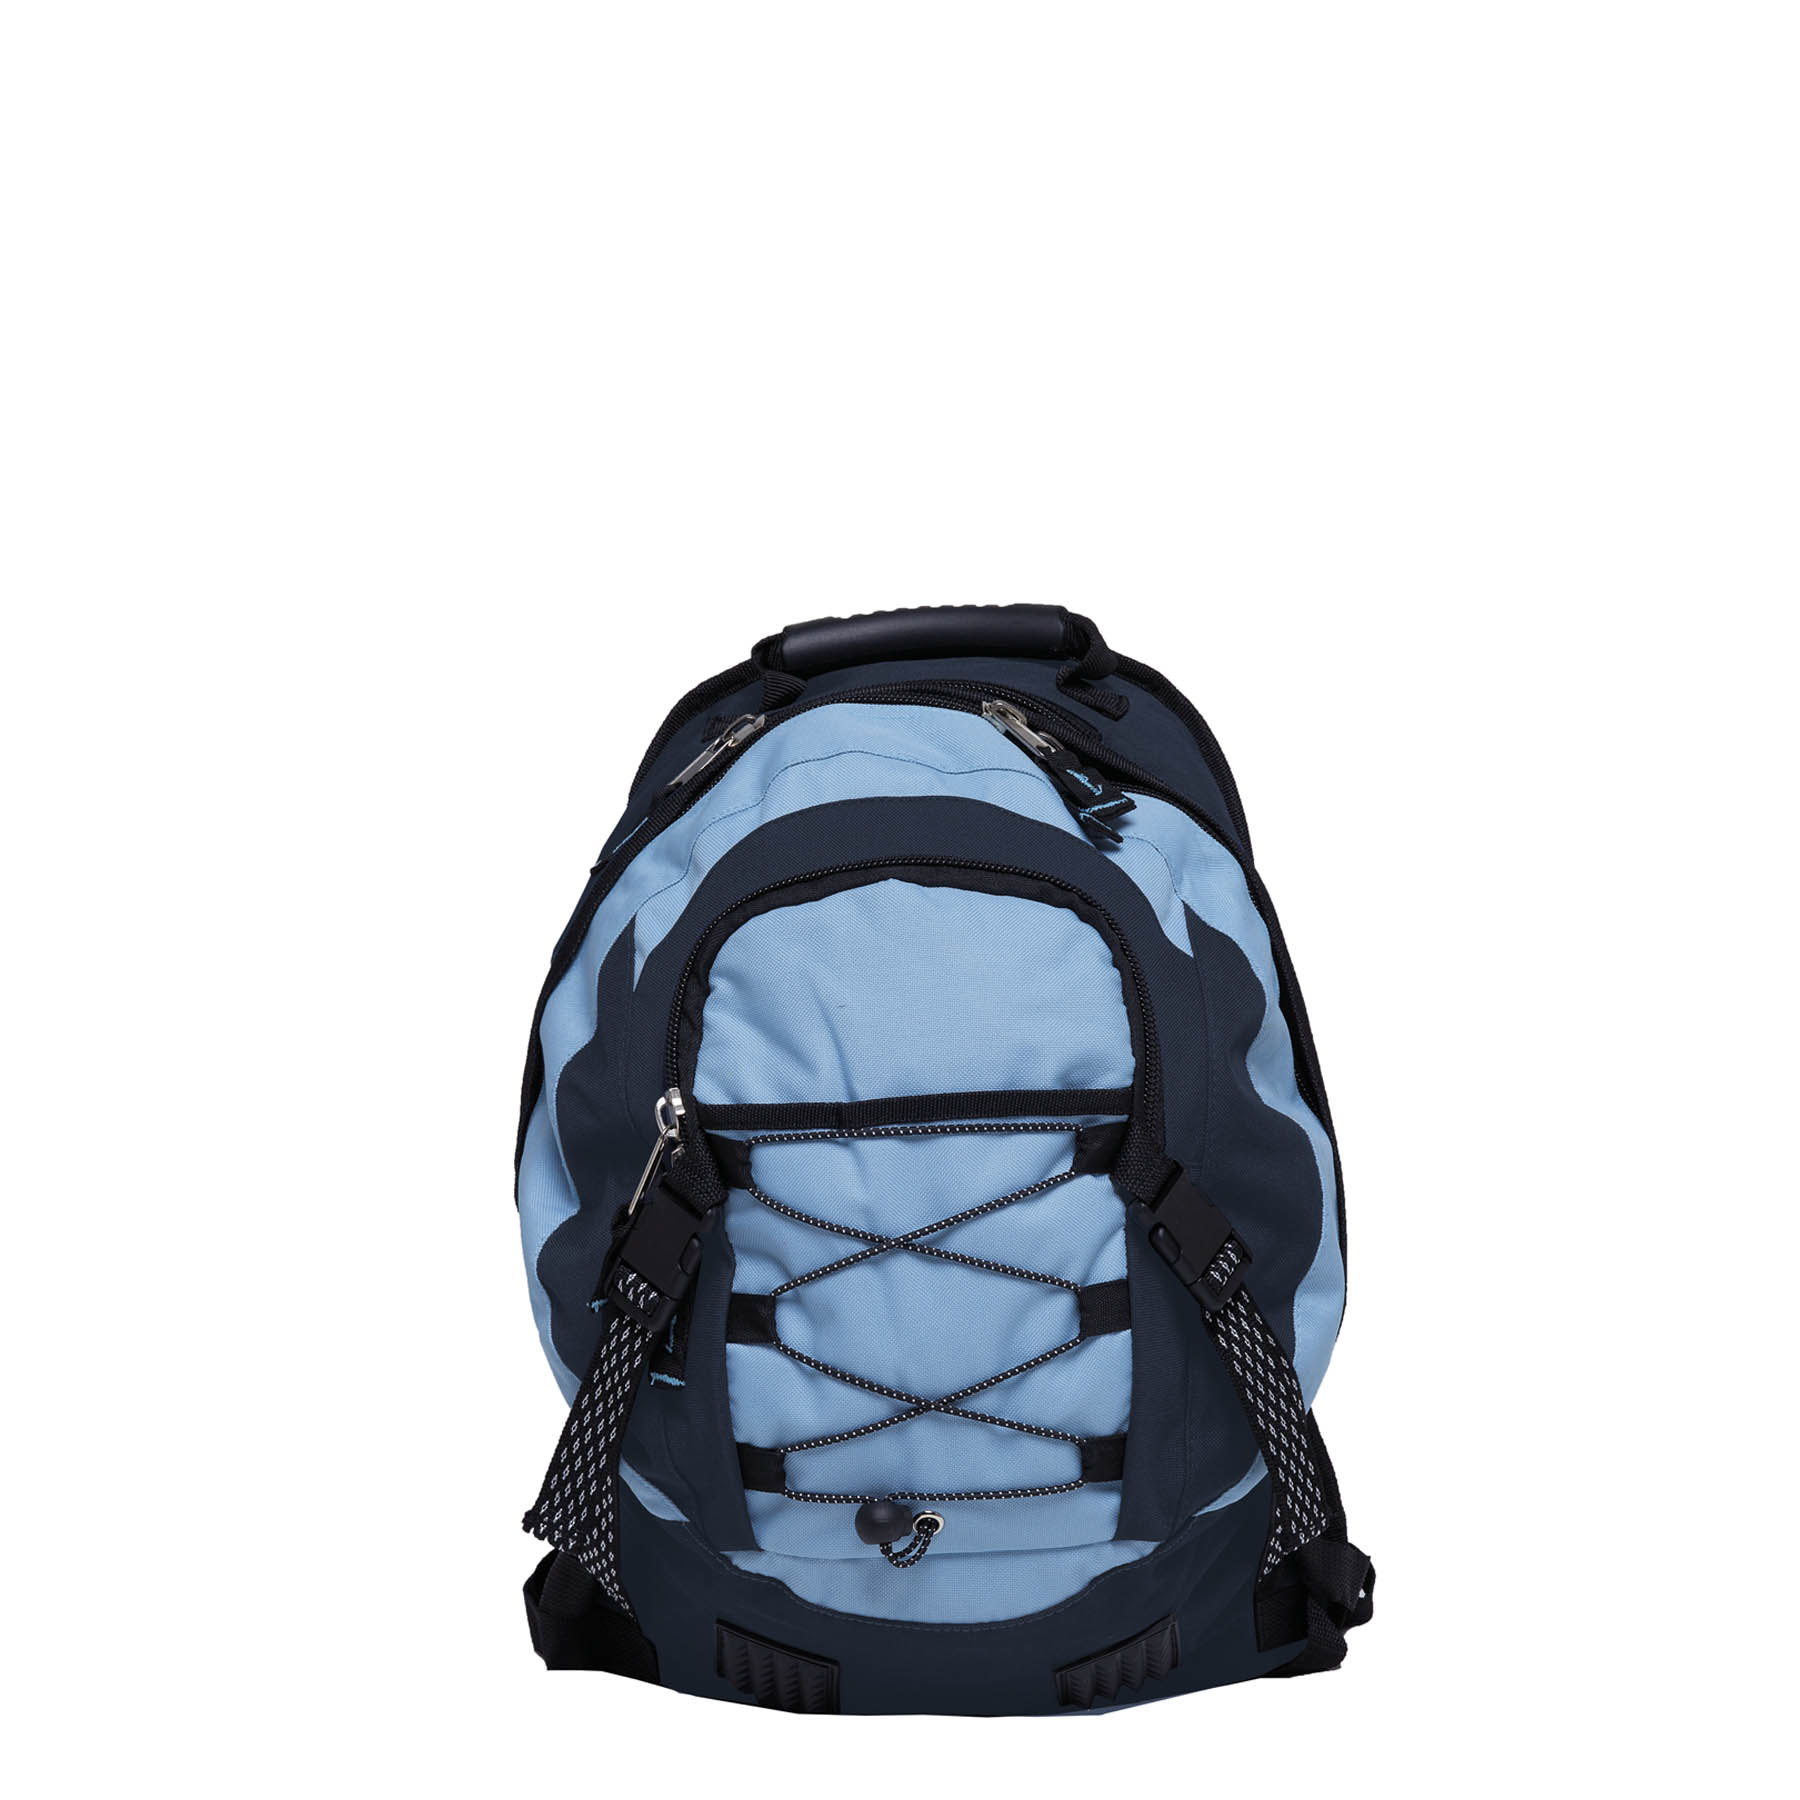 Stealth Backpack | Gear For Life